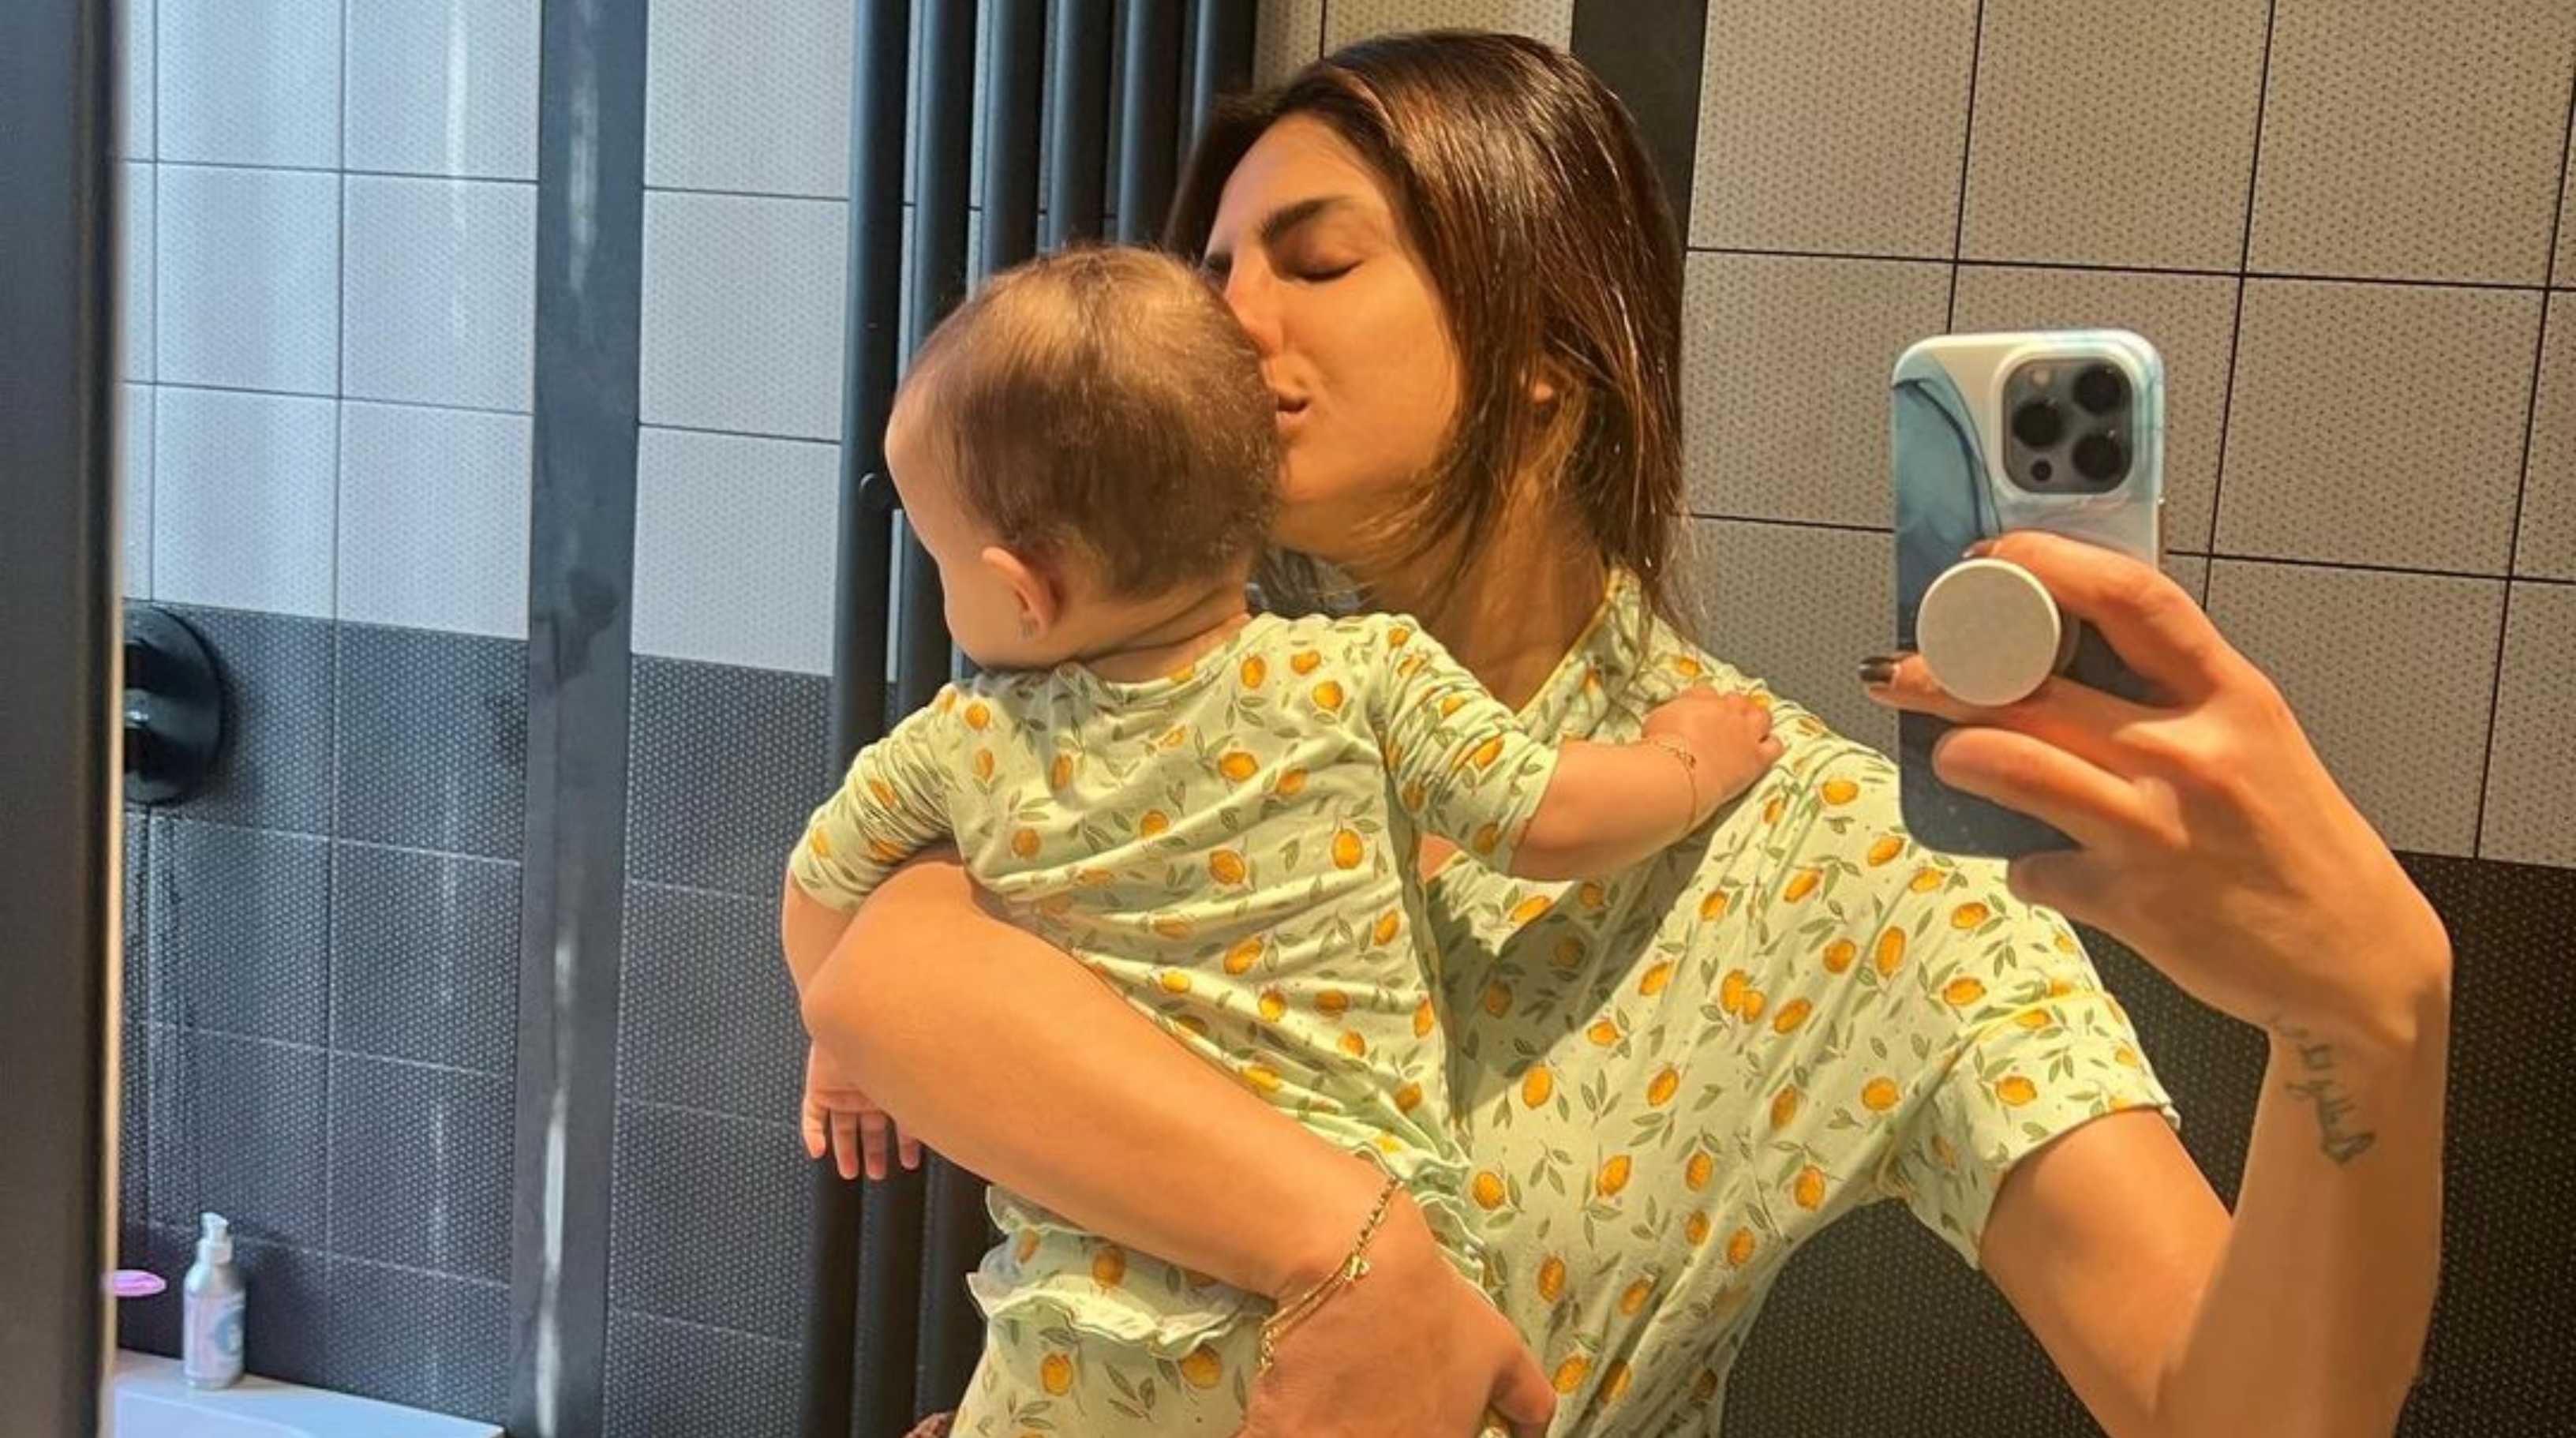 Priyanka Chopra Jonas opens up about Malti Marie’s first trip to India, reveals her daughter loved the food